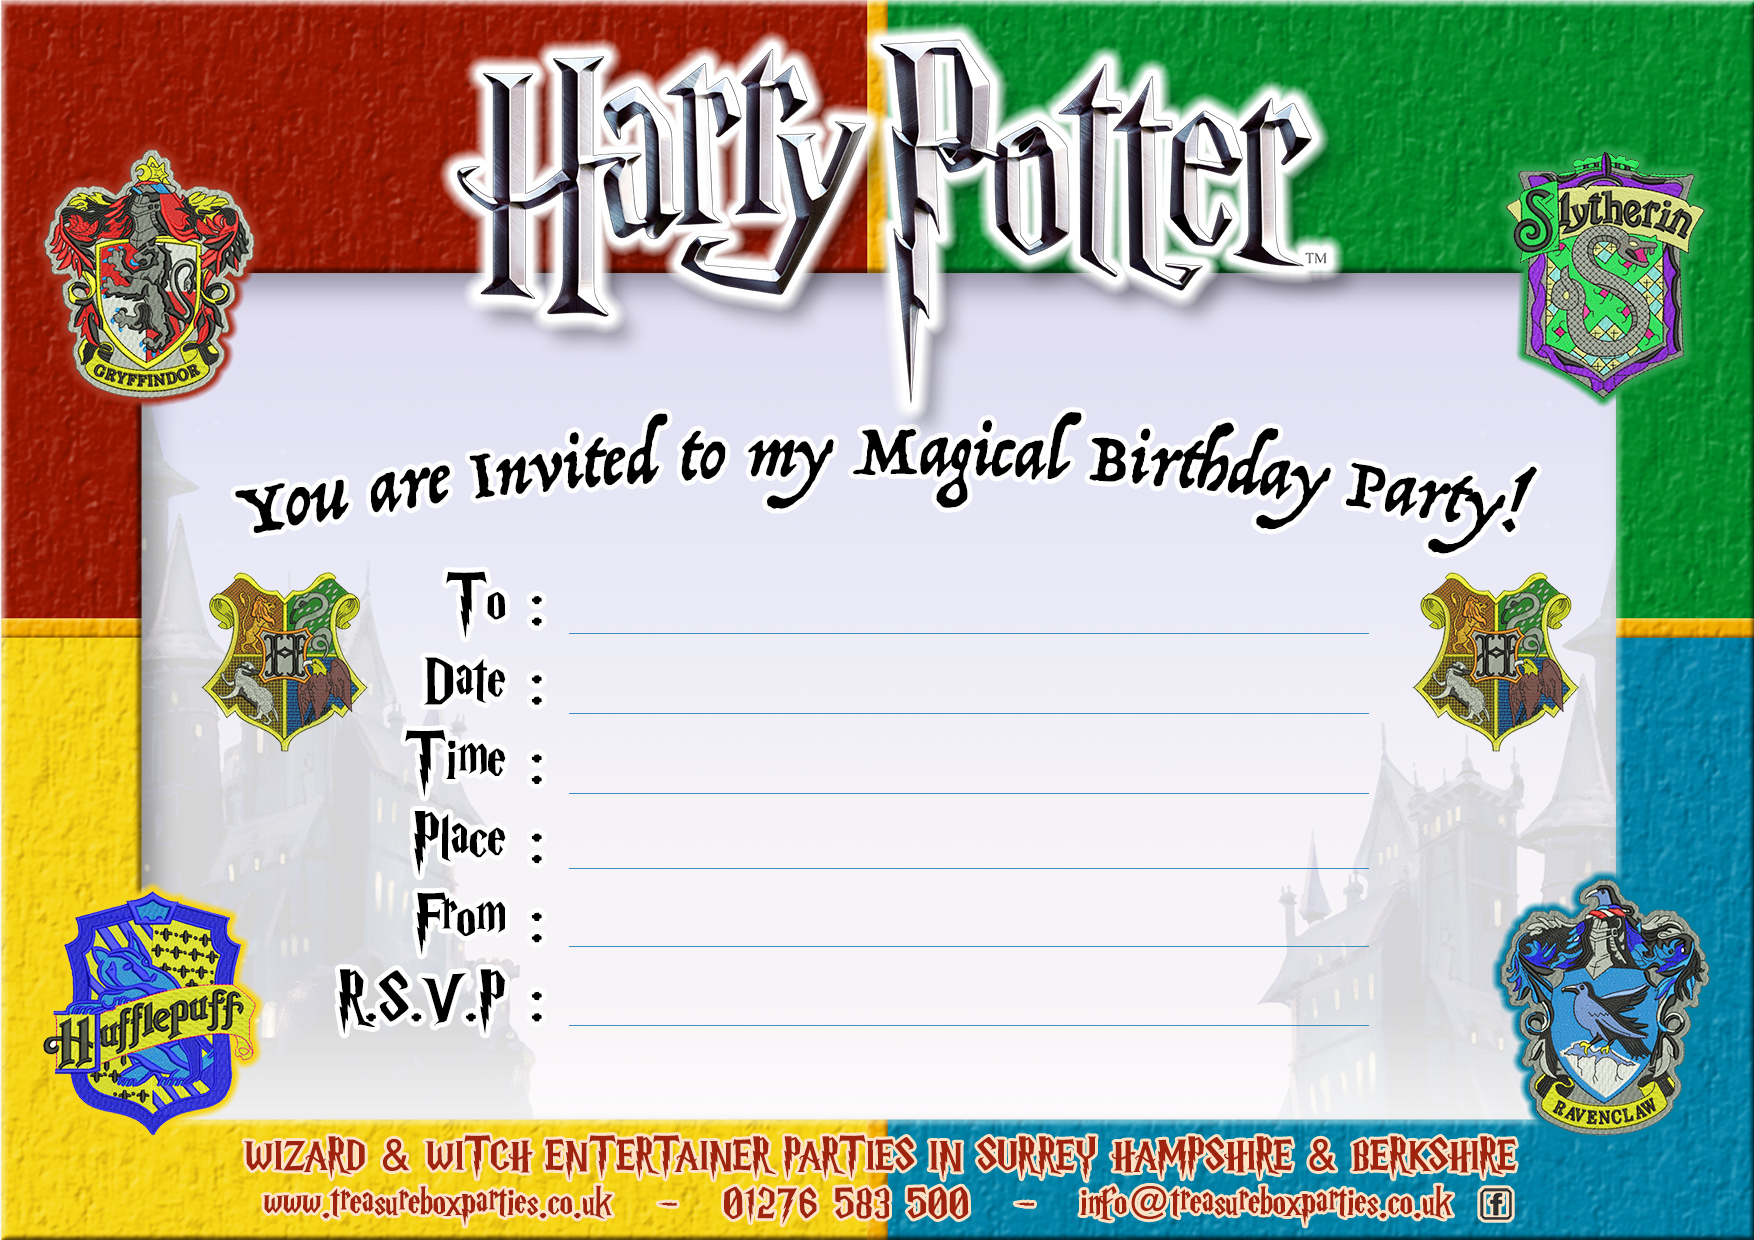 Free Printable Harry Potter Birthday Party Invitation Childrens Entertainer Parties Surrey Berkshire Hampshire Treasure Box Parties Supplies Kids Party Games Ideas